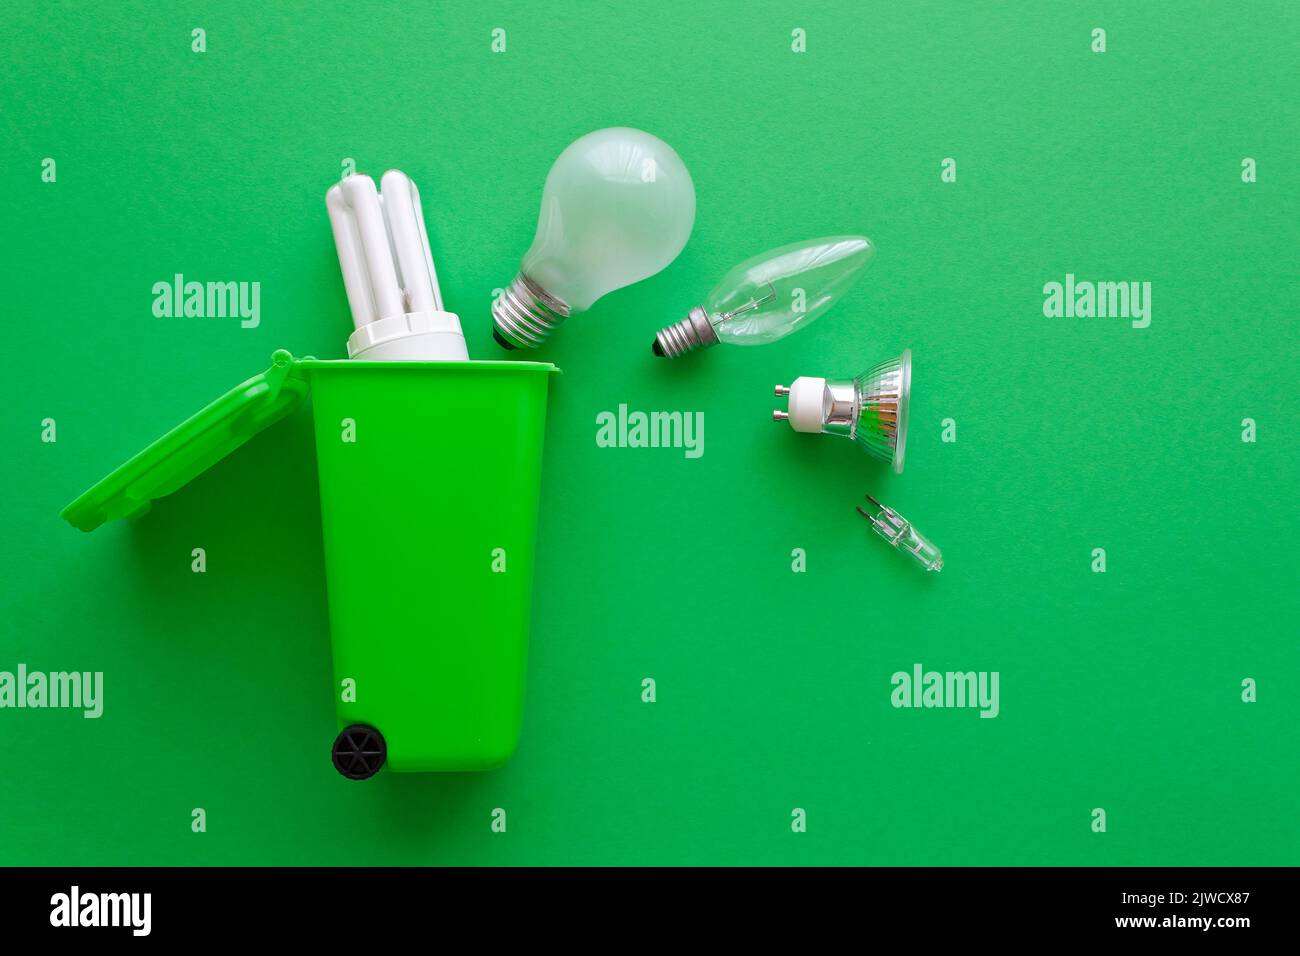 Stop energy waste concept: diverse old halogen and fluorescent light bulbs on their way into a recycling bin, green background, text or copy space. Stock Photo